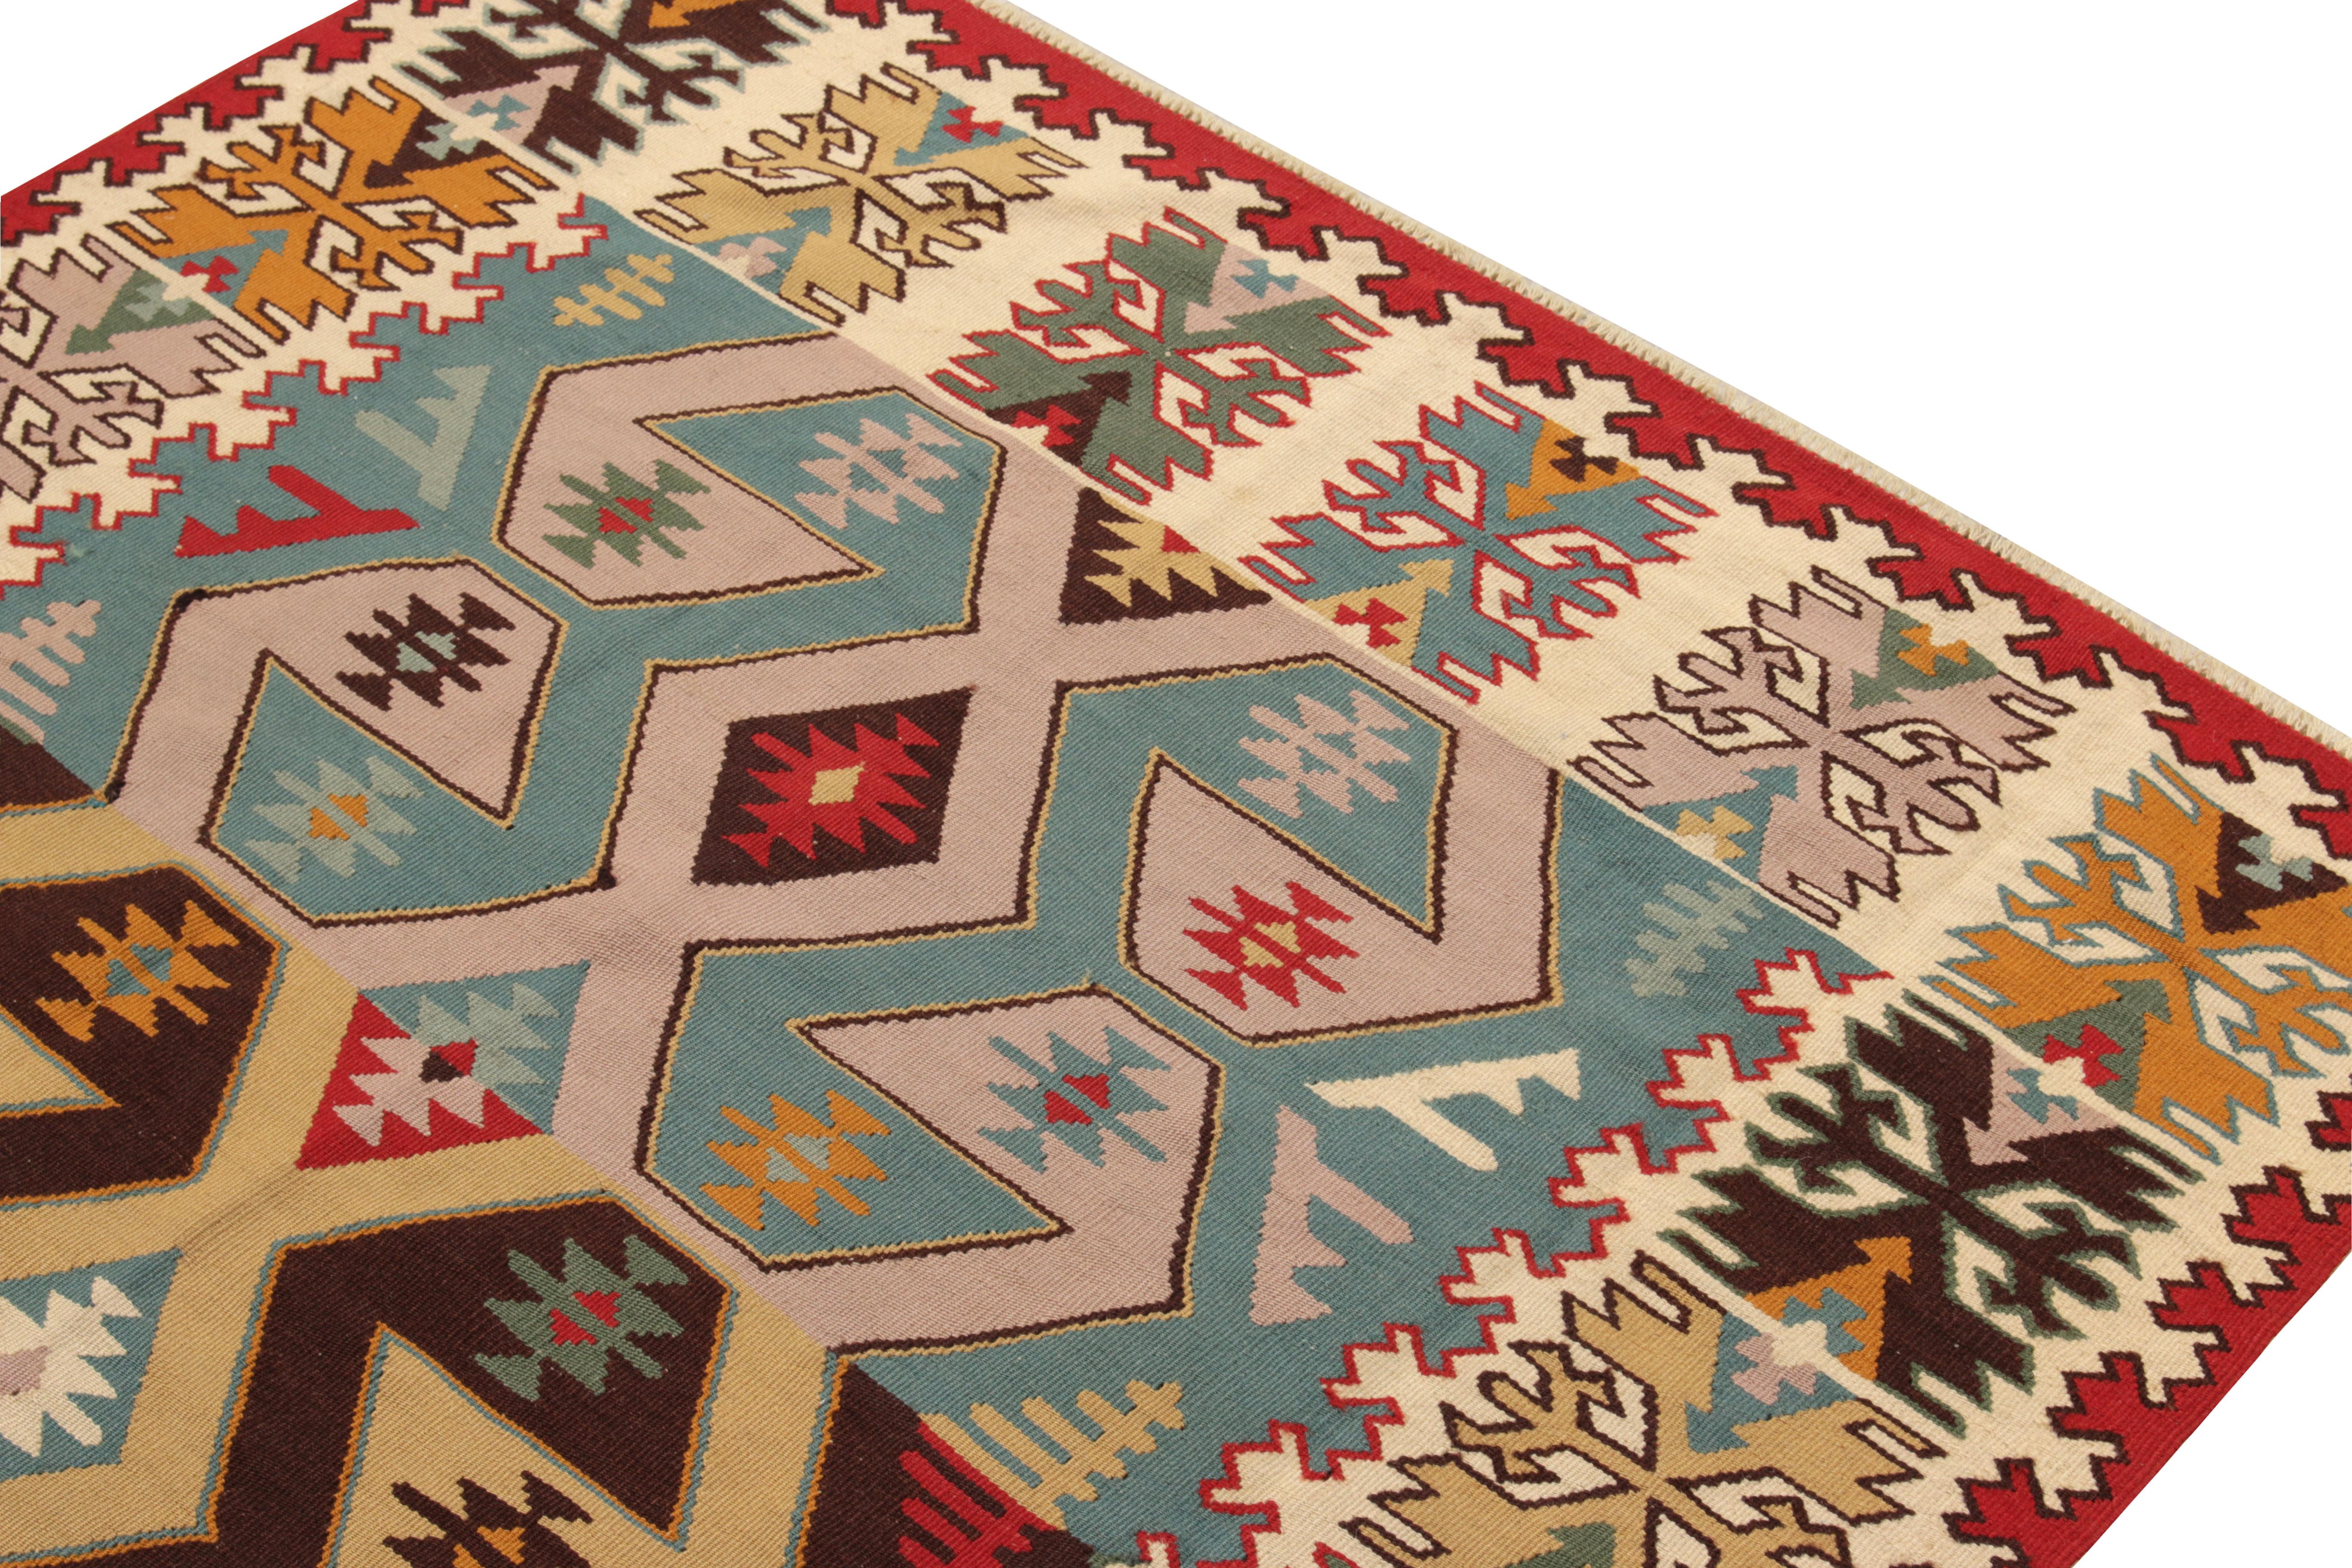 Vintage Turkish Kilim Rug in Multicolor, Tribal Geometric Pattern by Rug & Kilim In Good Condition For Sale In Long Island City, NY